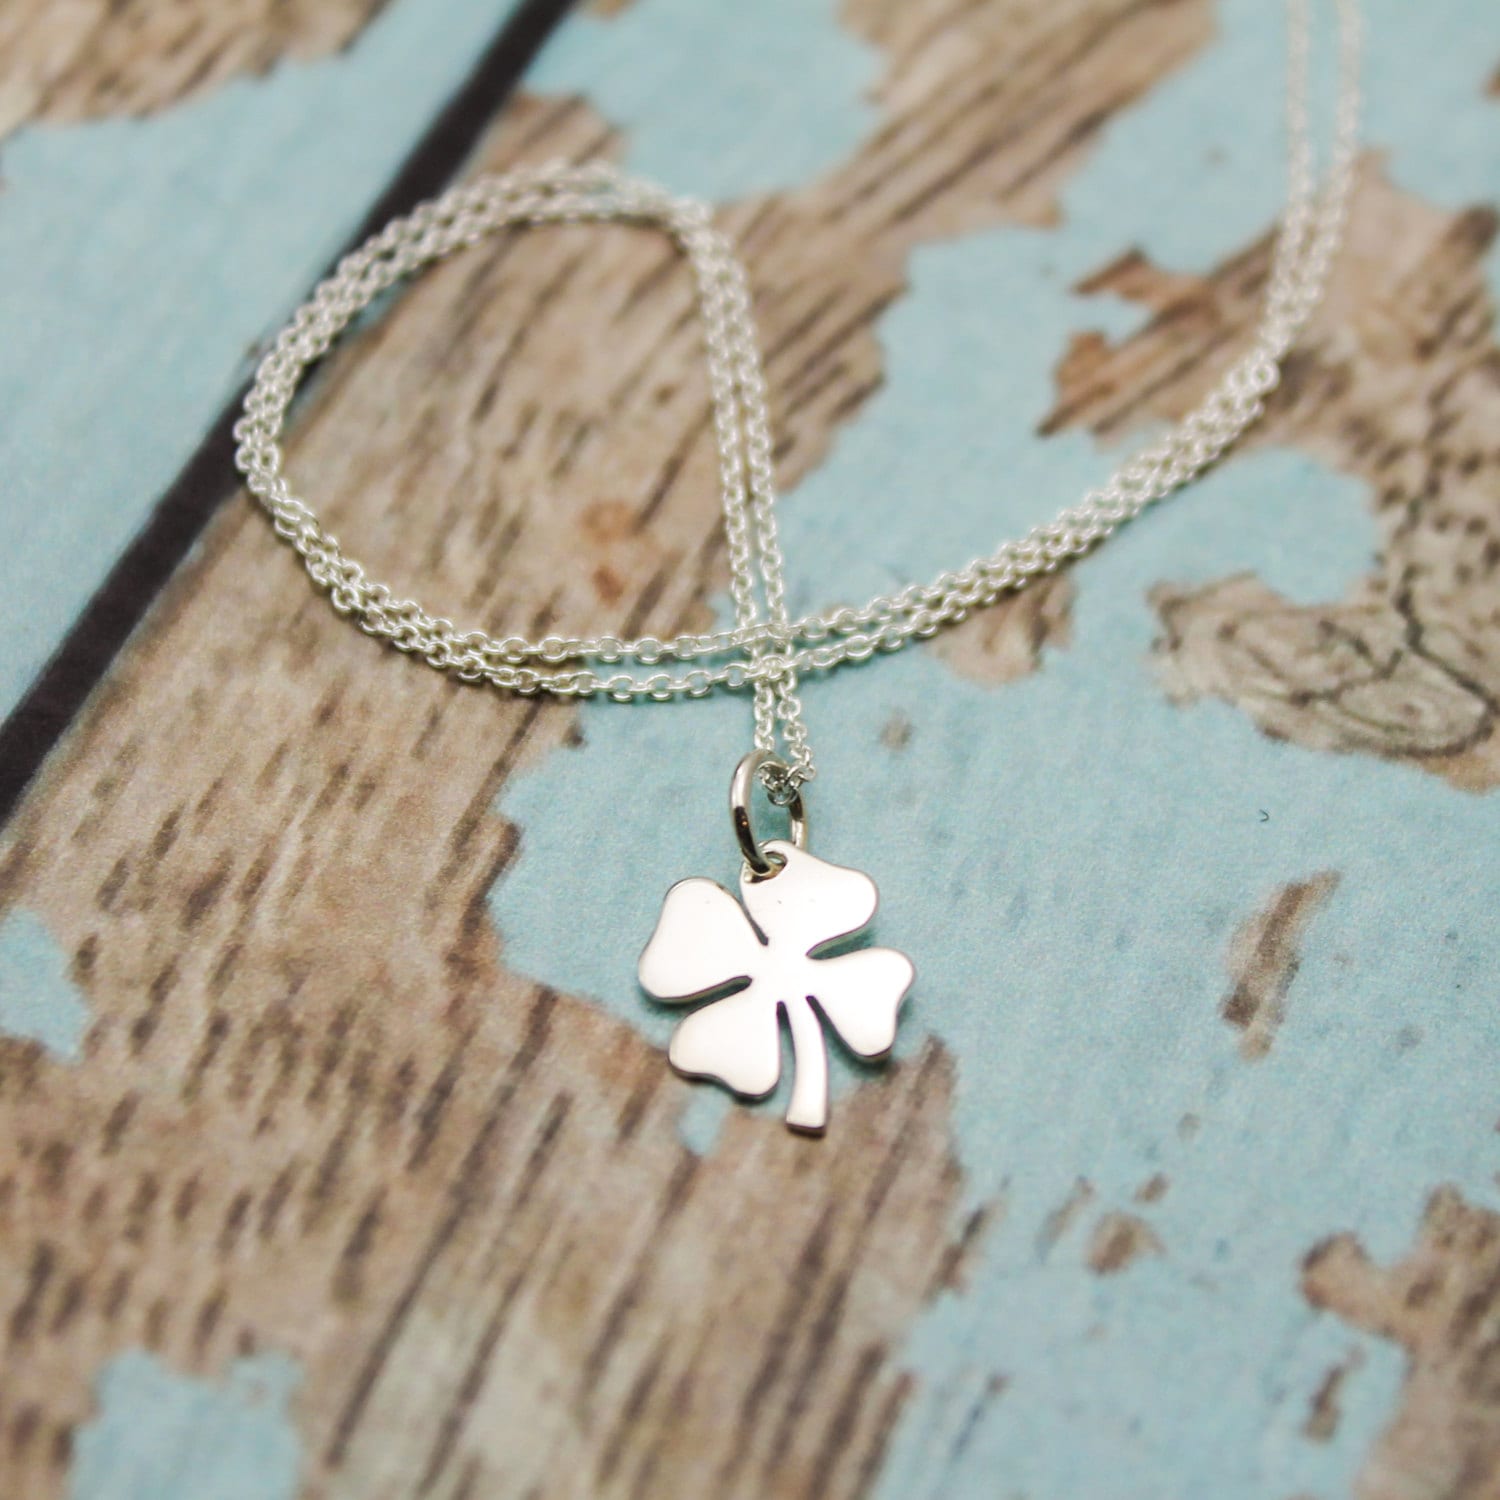 Lucky Shamrock Charm Necklace in Sterling Silver